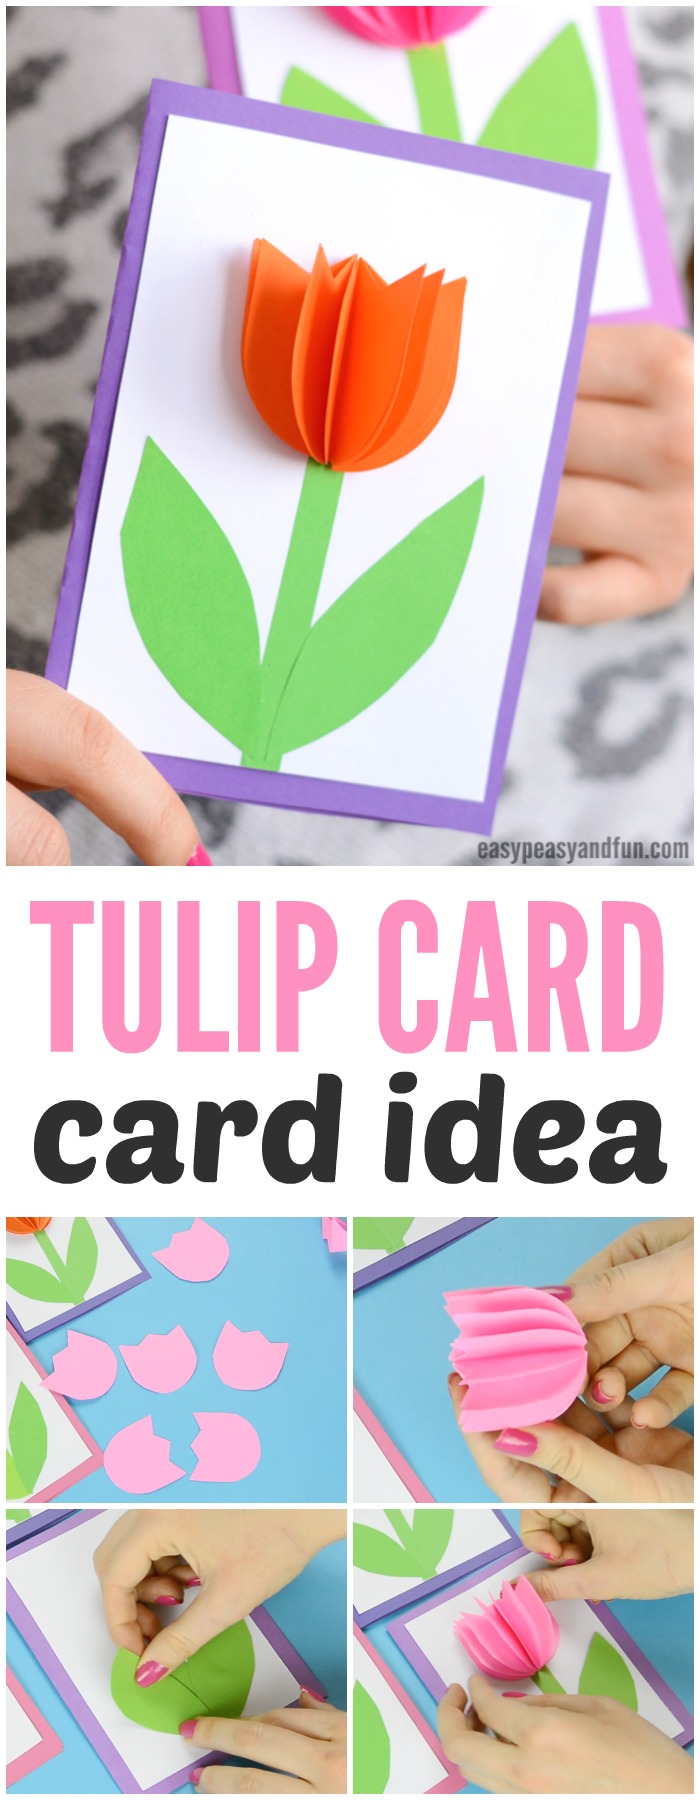 3D tulip card idea for mother's day. An interesting spring craft for kids to make.